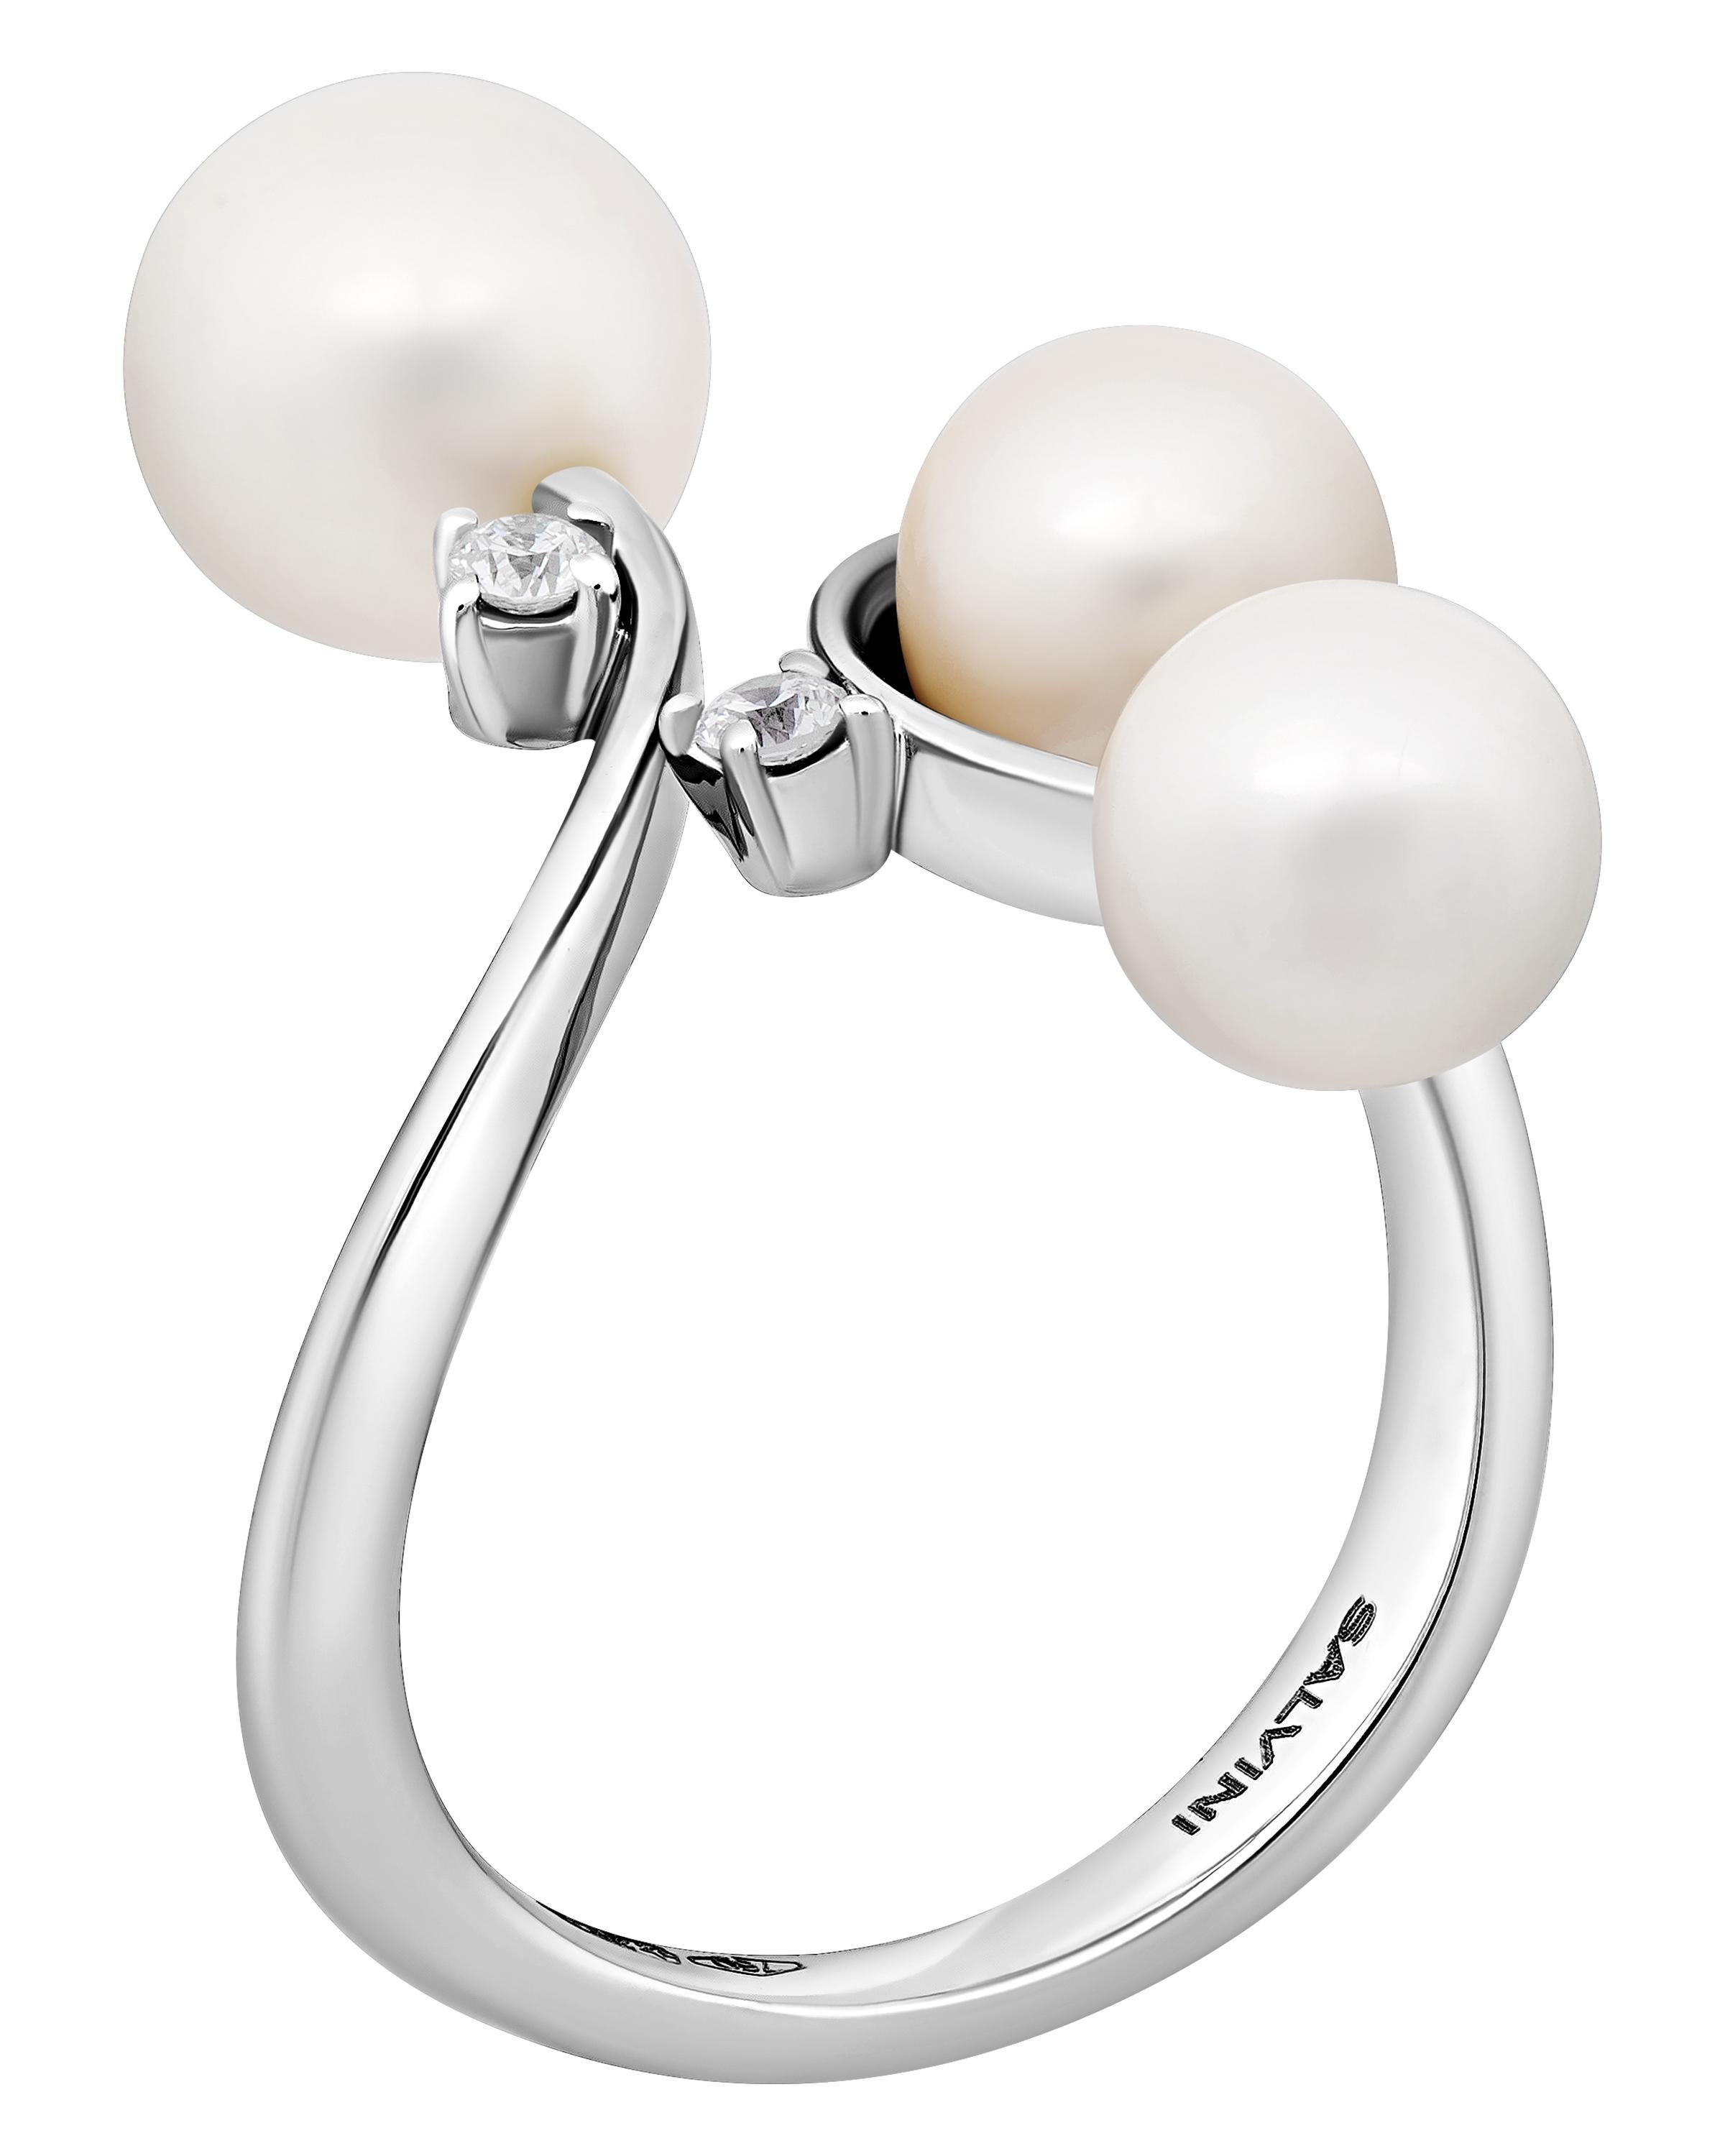 Contemporary SALVINI 18K White Gold, Pearl and Diamond Wrap Ring sz 6.75 For Sale